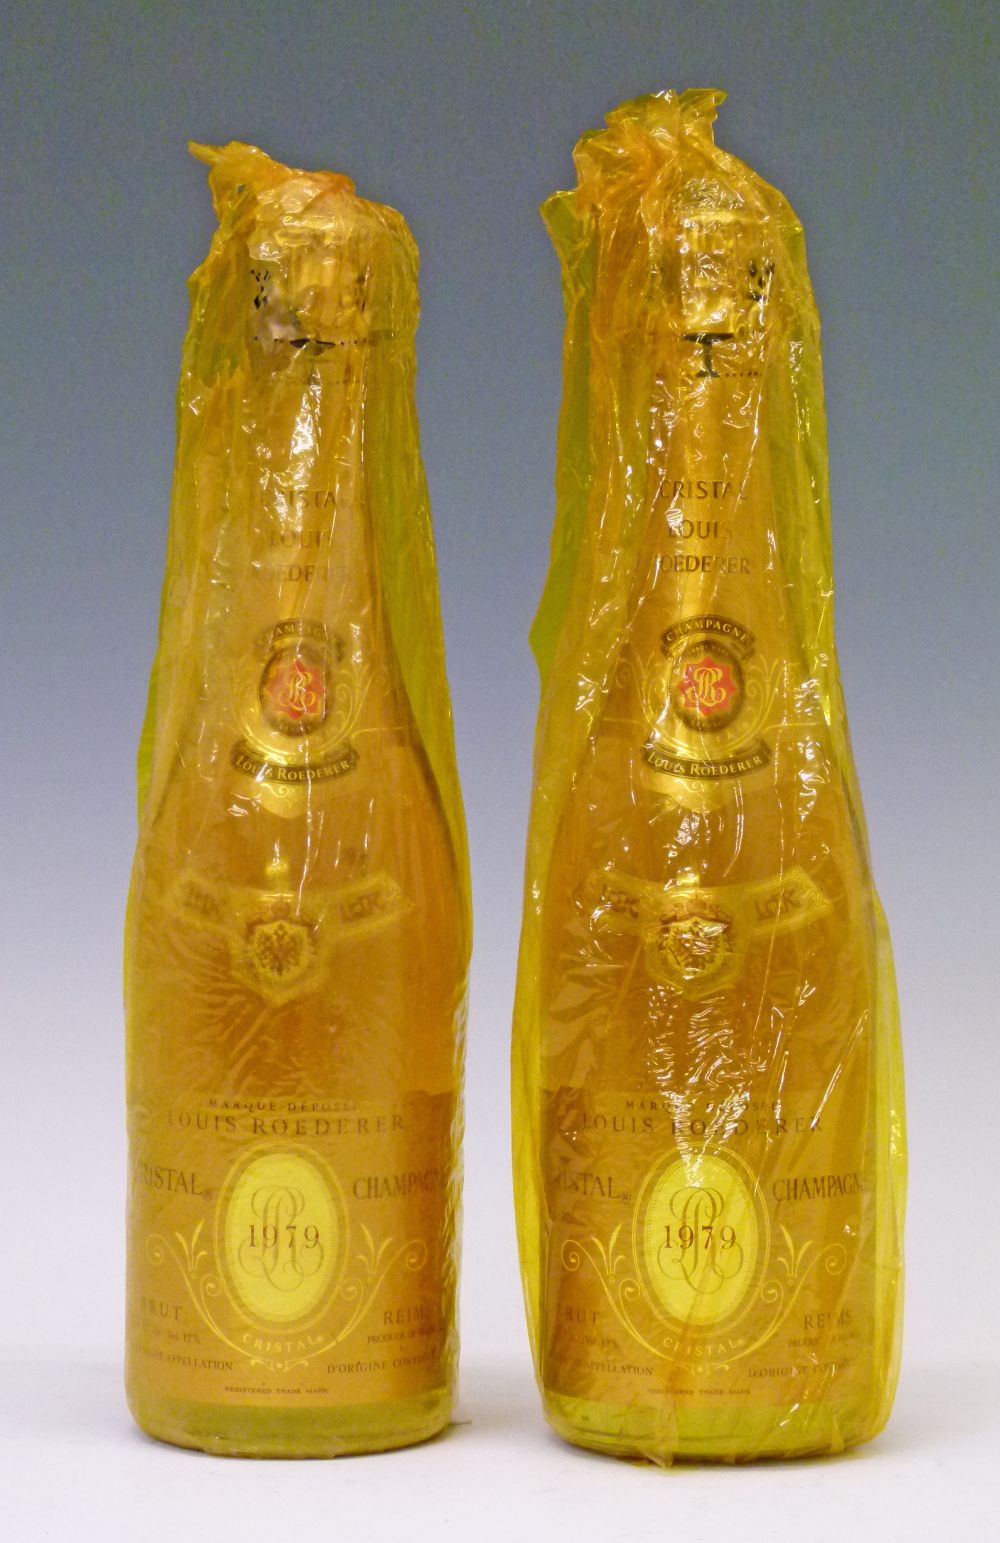 Wines and Spirits - Two bottles Louis Roederer Cristal 1979, Champagne Brut Millesime (2)